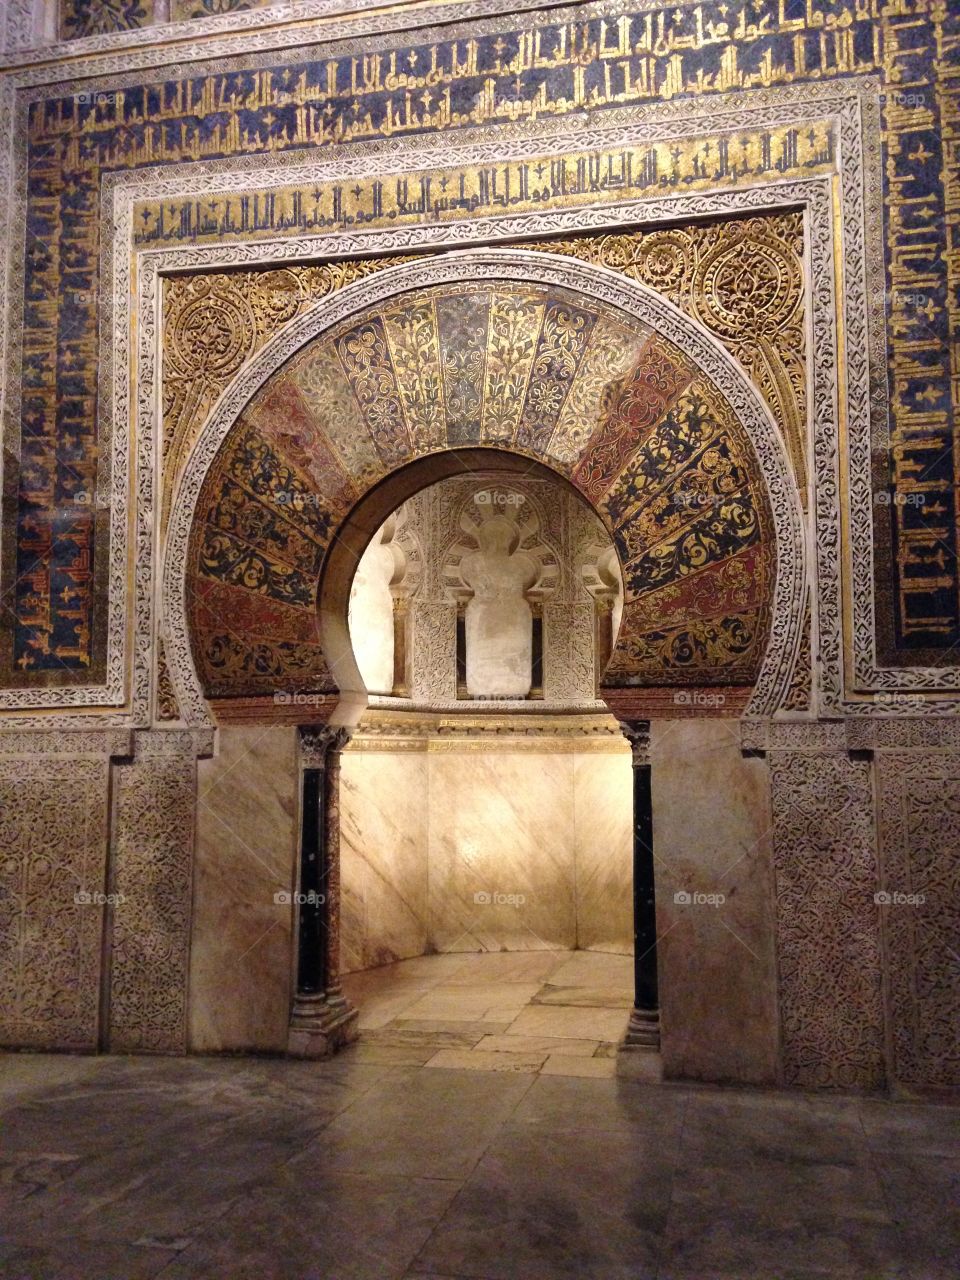 Niche at Córdoba Mosque. Niche indicating the direction of the Qibla in mosque of Córdoba, Spain